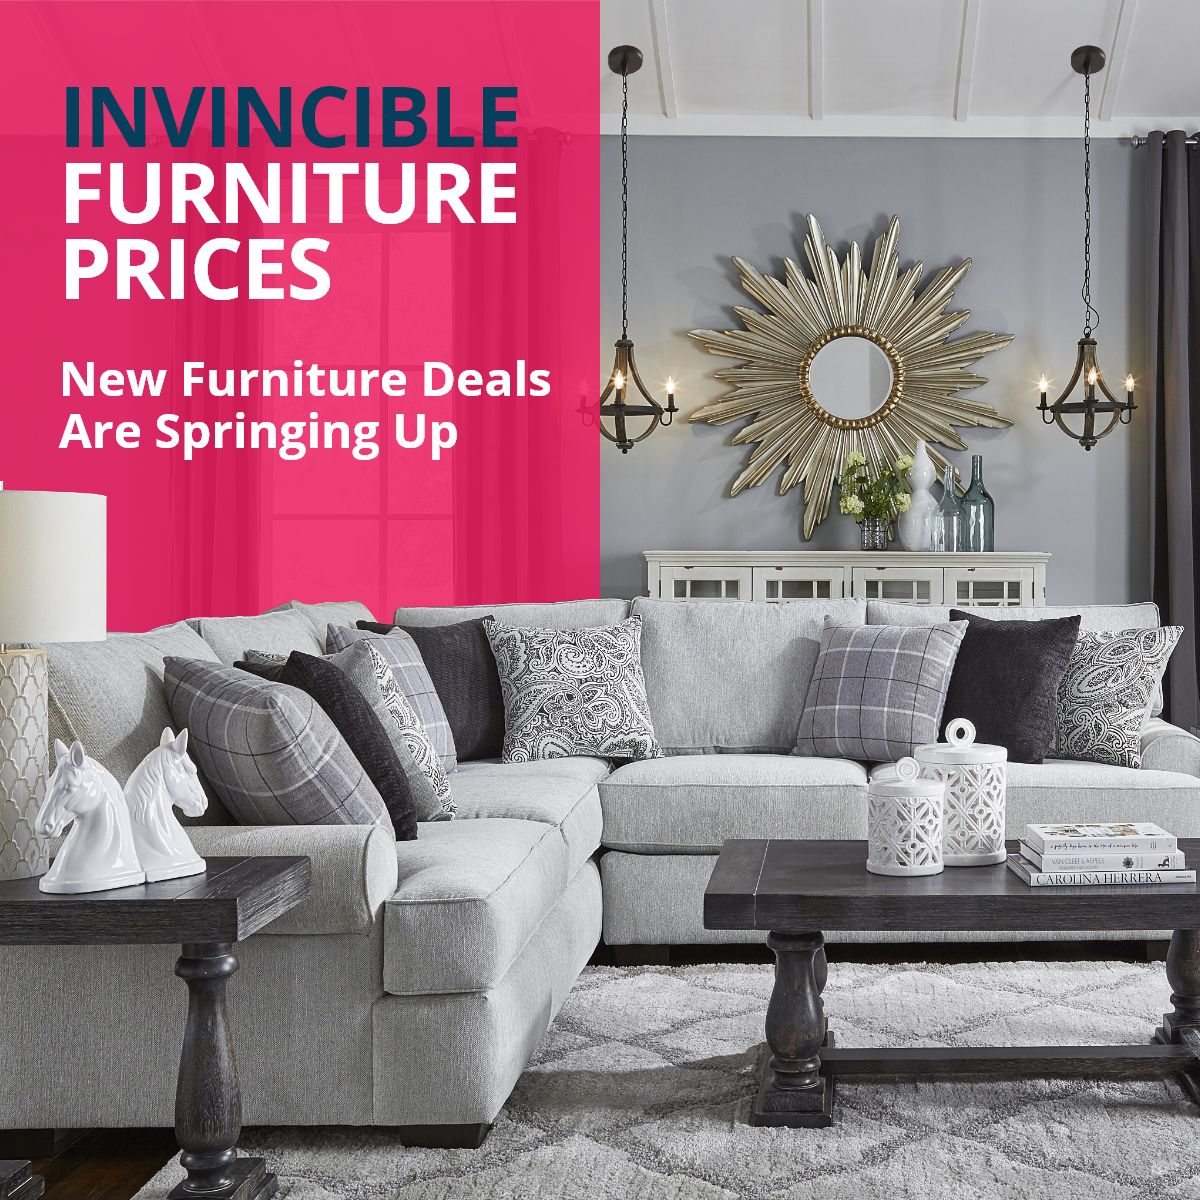 Invincible Prices on Furniture